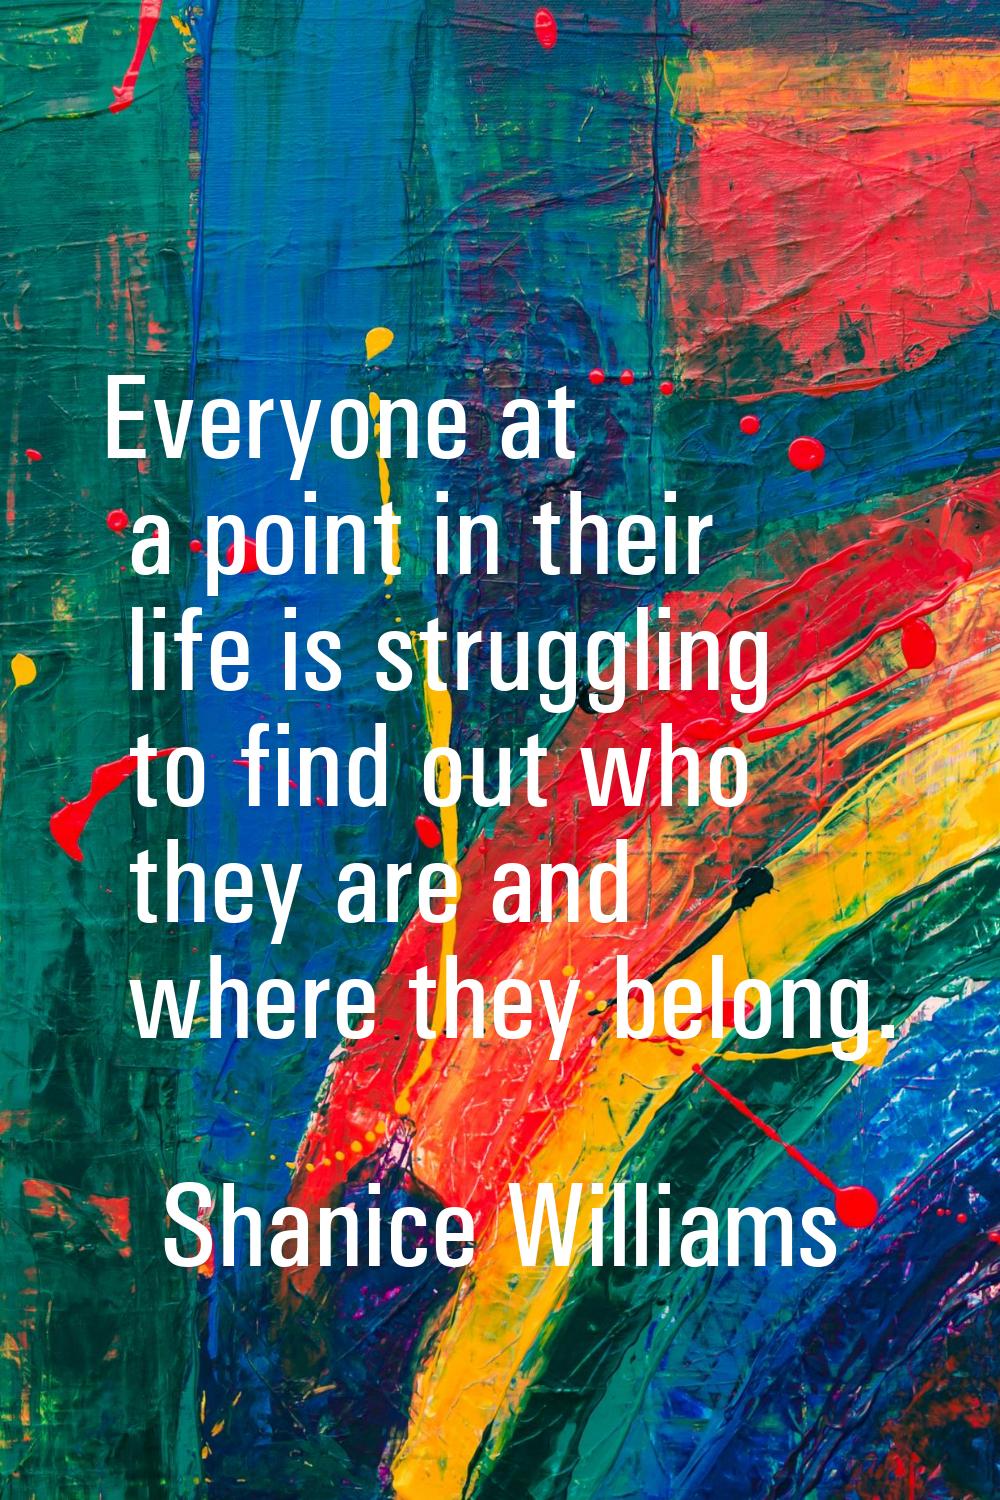 Everyone at a point in their life is struggling to find out who they are and where they belong.